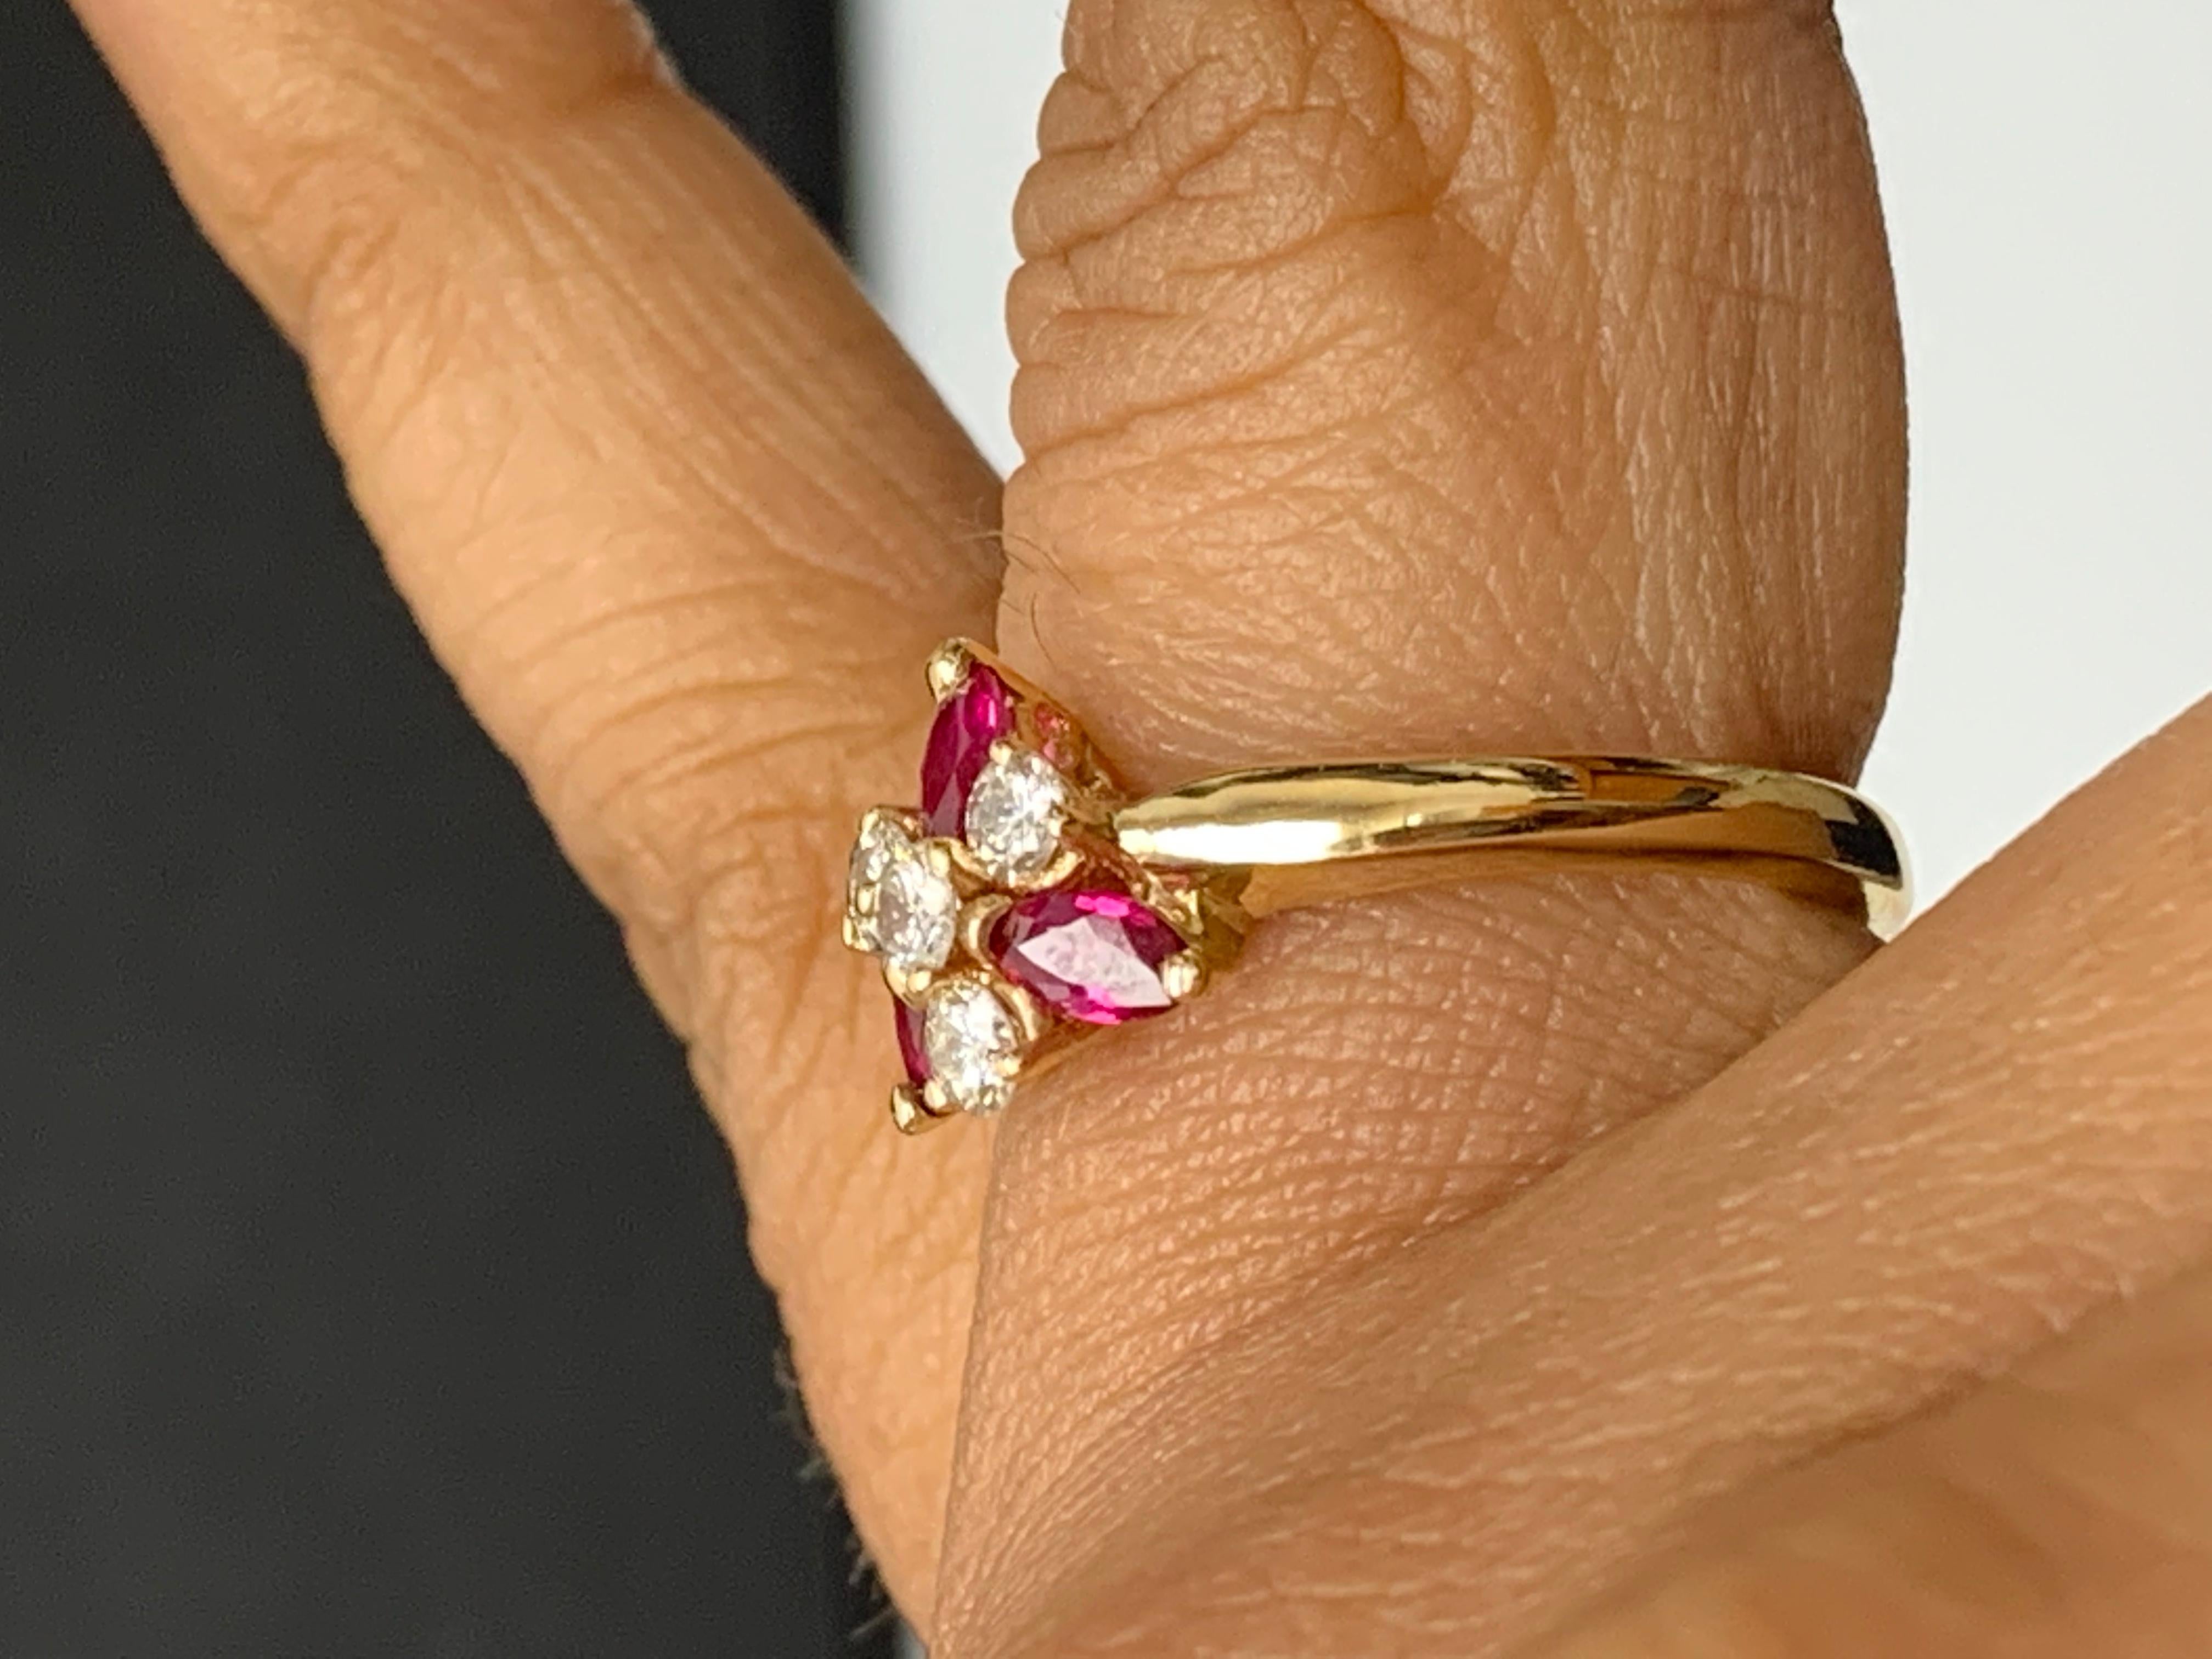 0.39 Carat Brilliant Cut Ruby and Diamond Ring in 14K Yellow Gold For Sale 1